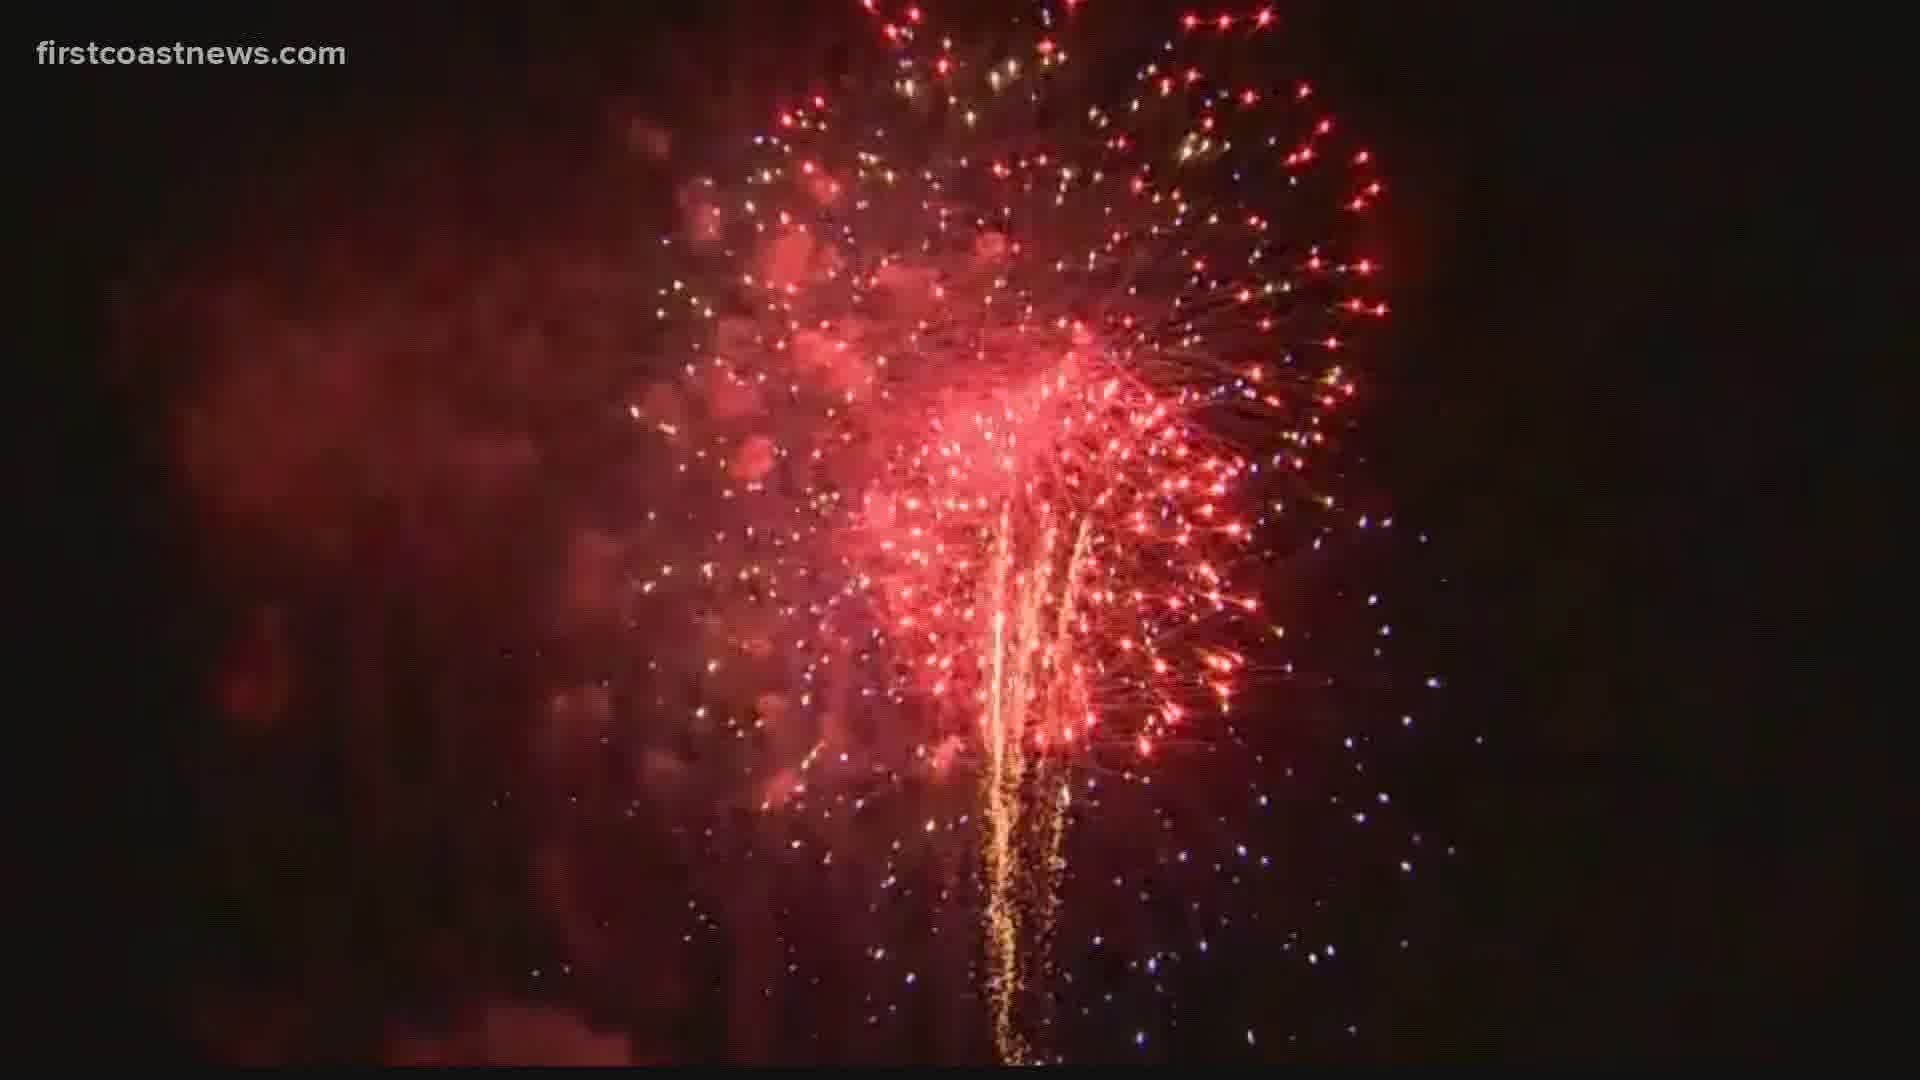 Jacksonville Beach's City Manager recommended canceling the event due to social distancing requirements. The council decided to postpone to New Year's Eve.